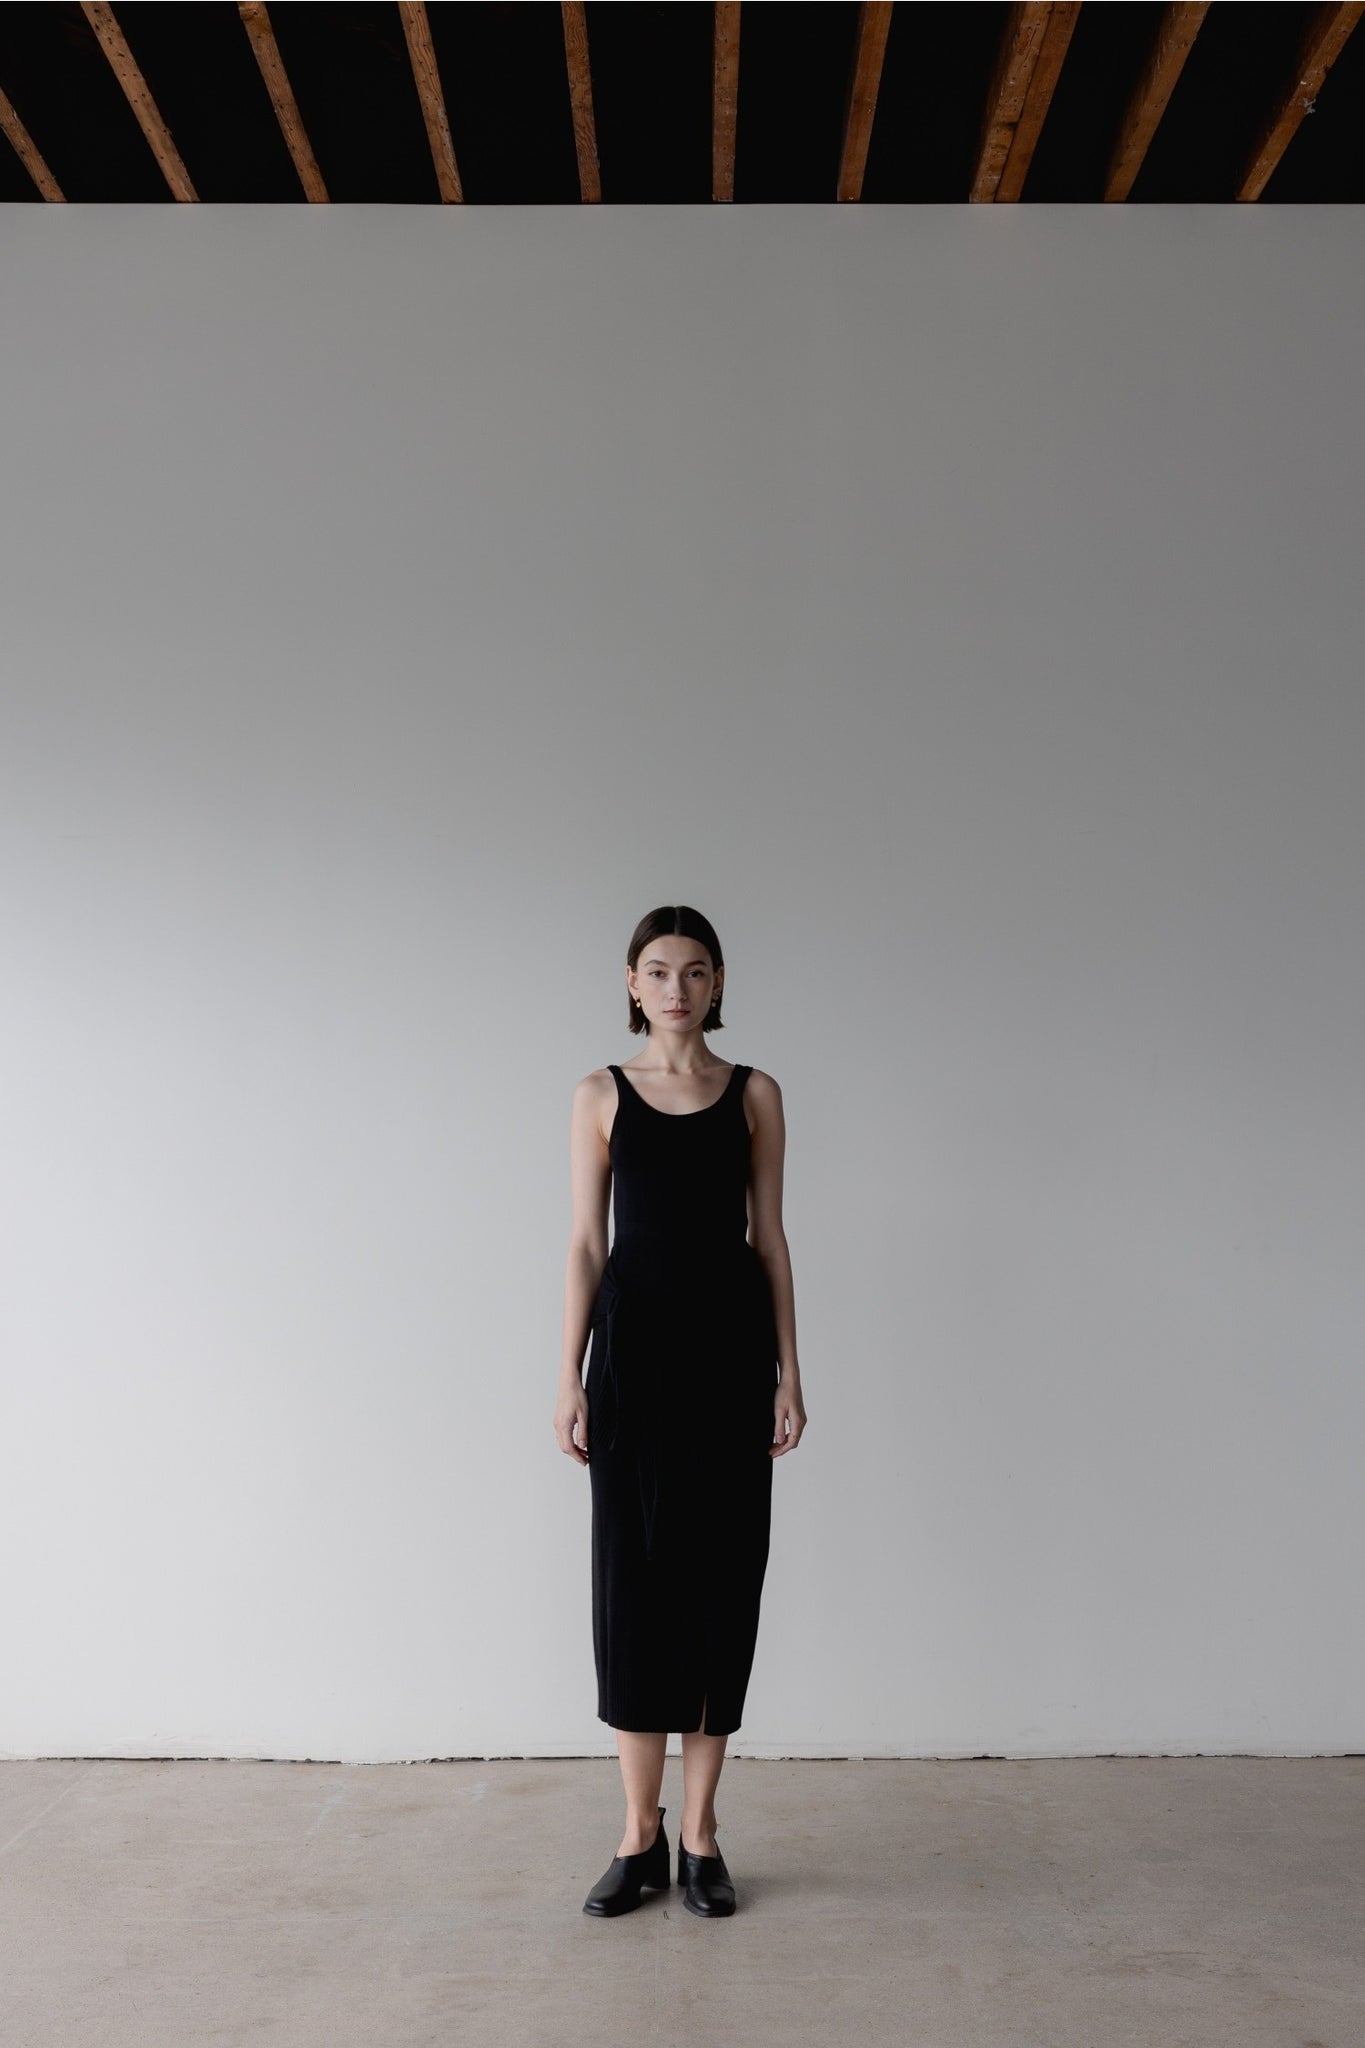 Model wearing Amelia Dress in Black with Tie Detailing available at UniKoncept in Waterloo